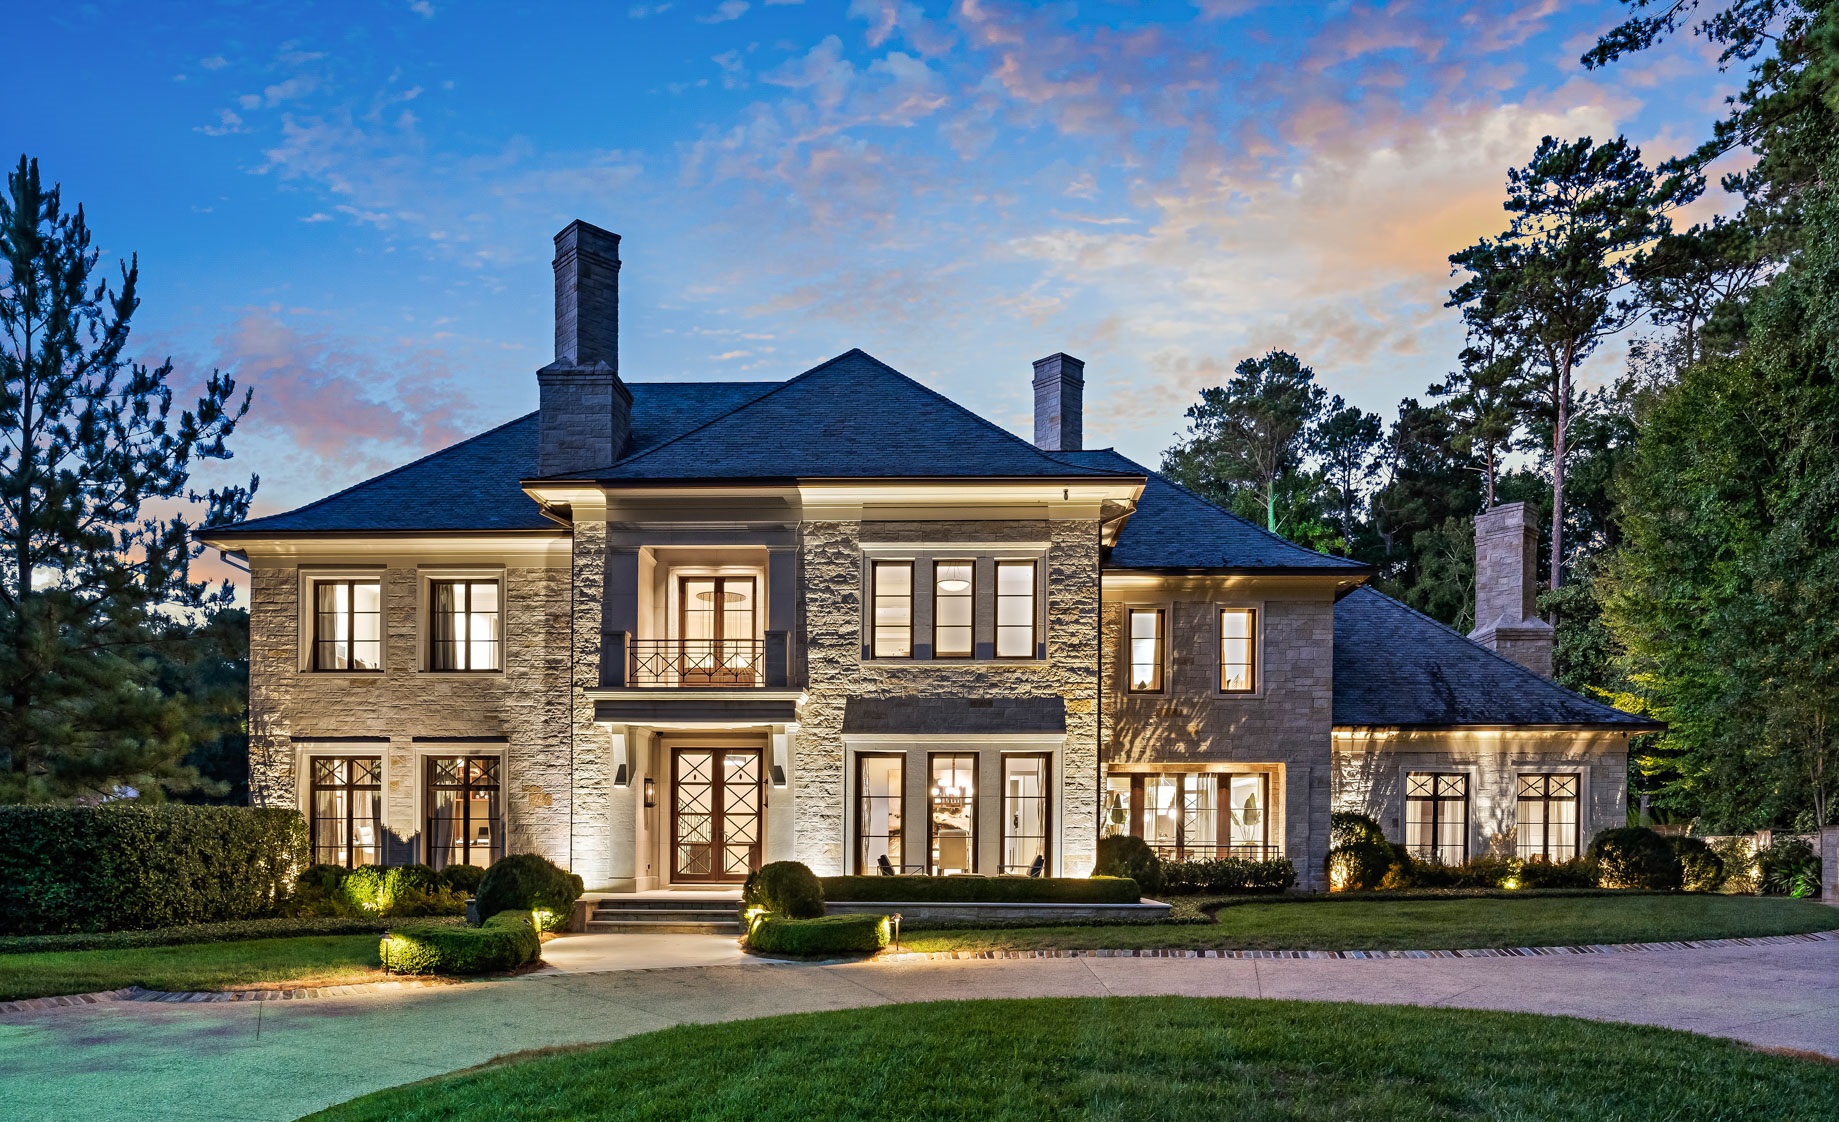 Sky House Mansion Architecture Lights Clouds Atlanta 1839x1122